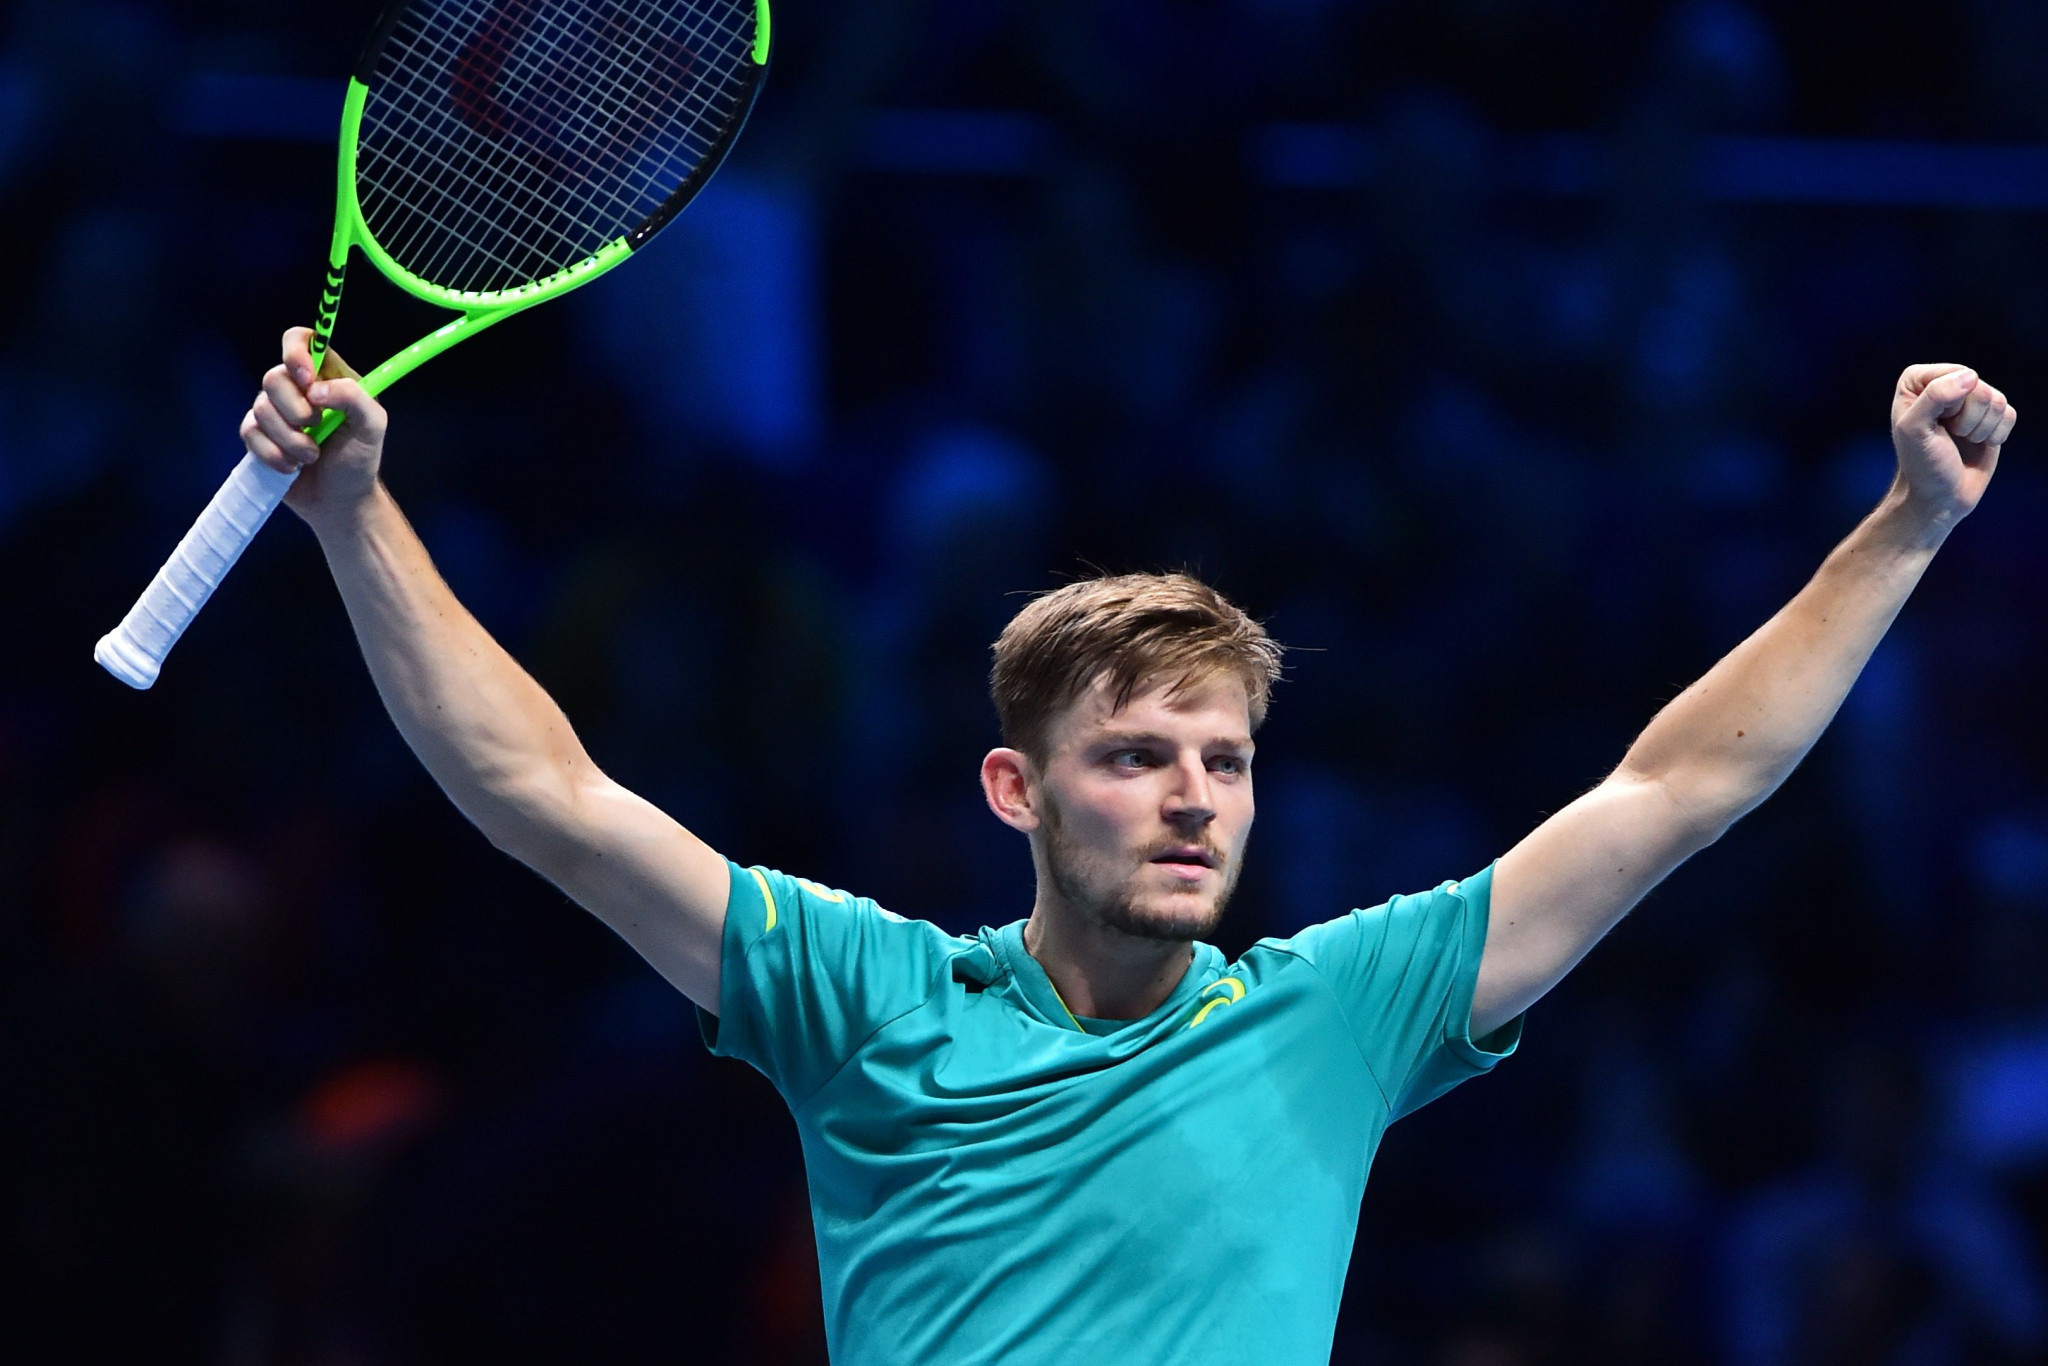 David Goffin beat an ailing Rafael Nadal in the evening session ©Getty Images